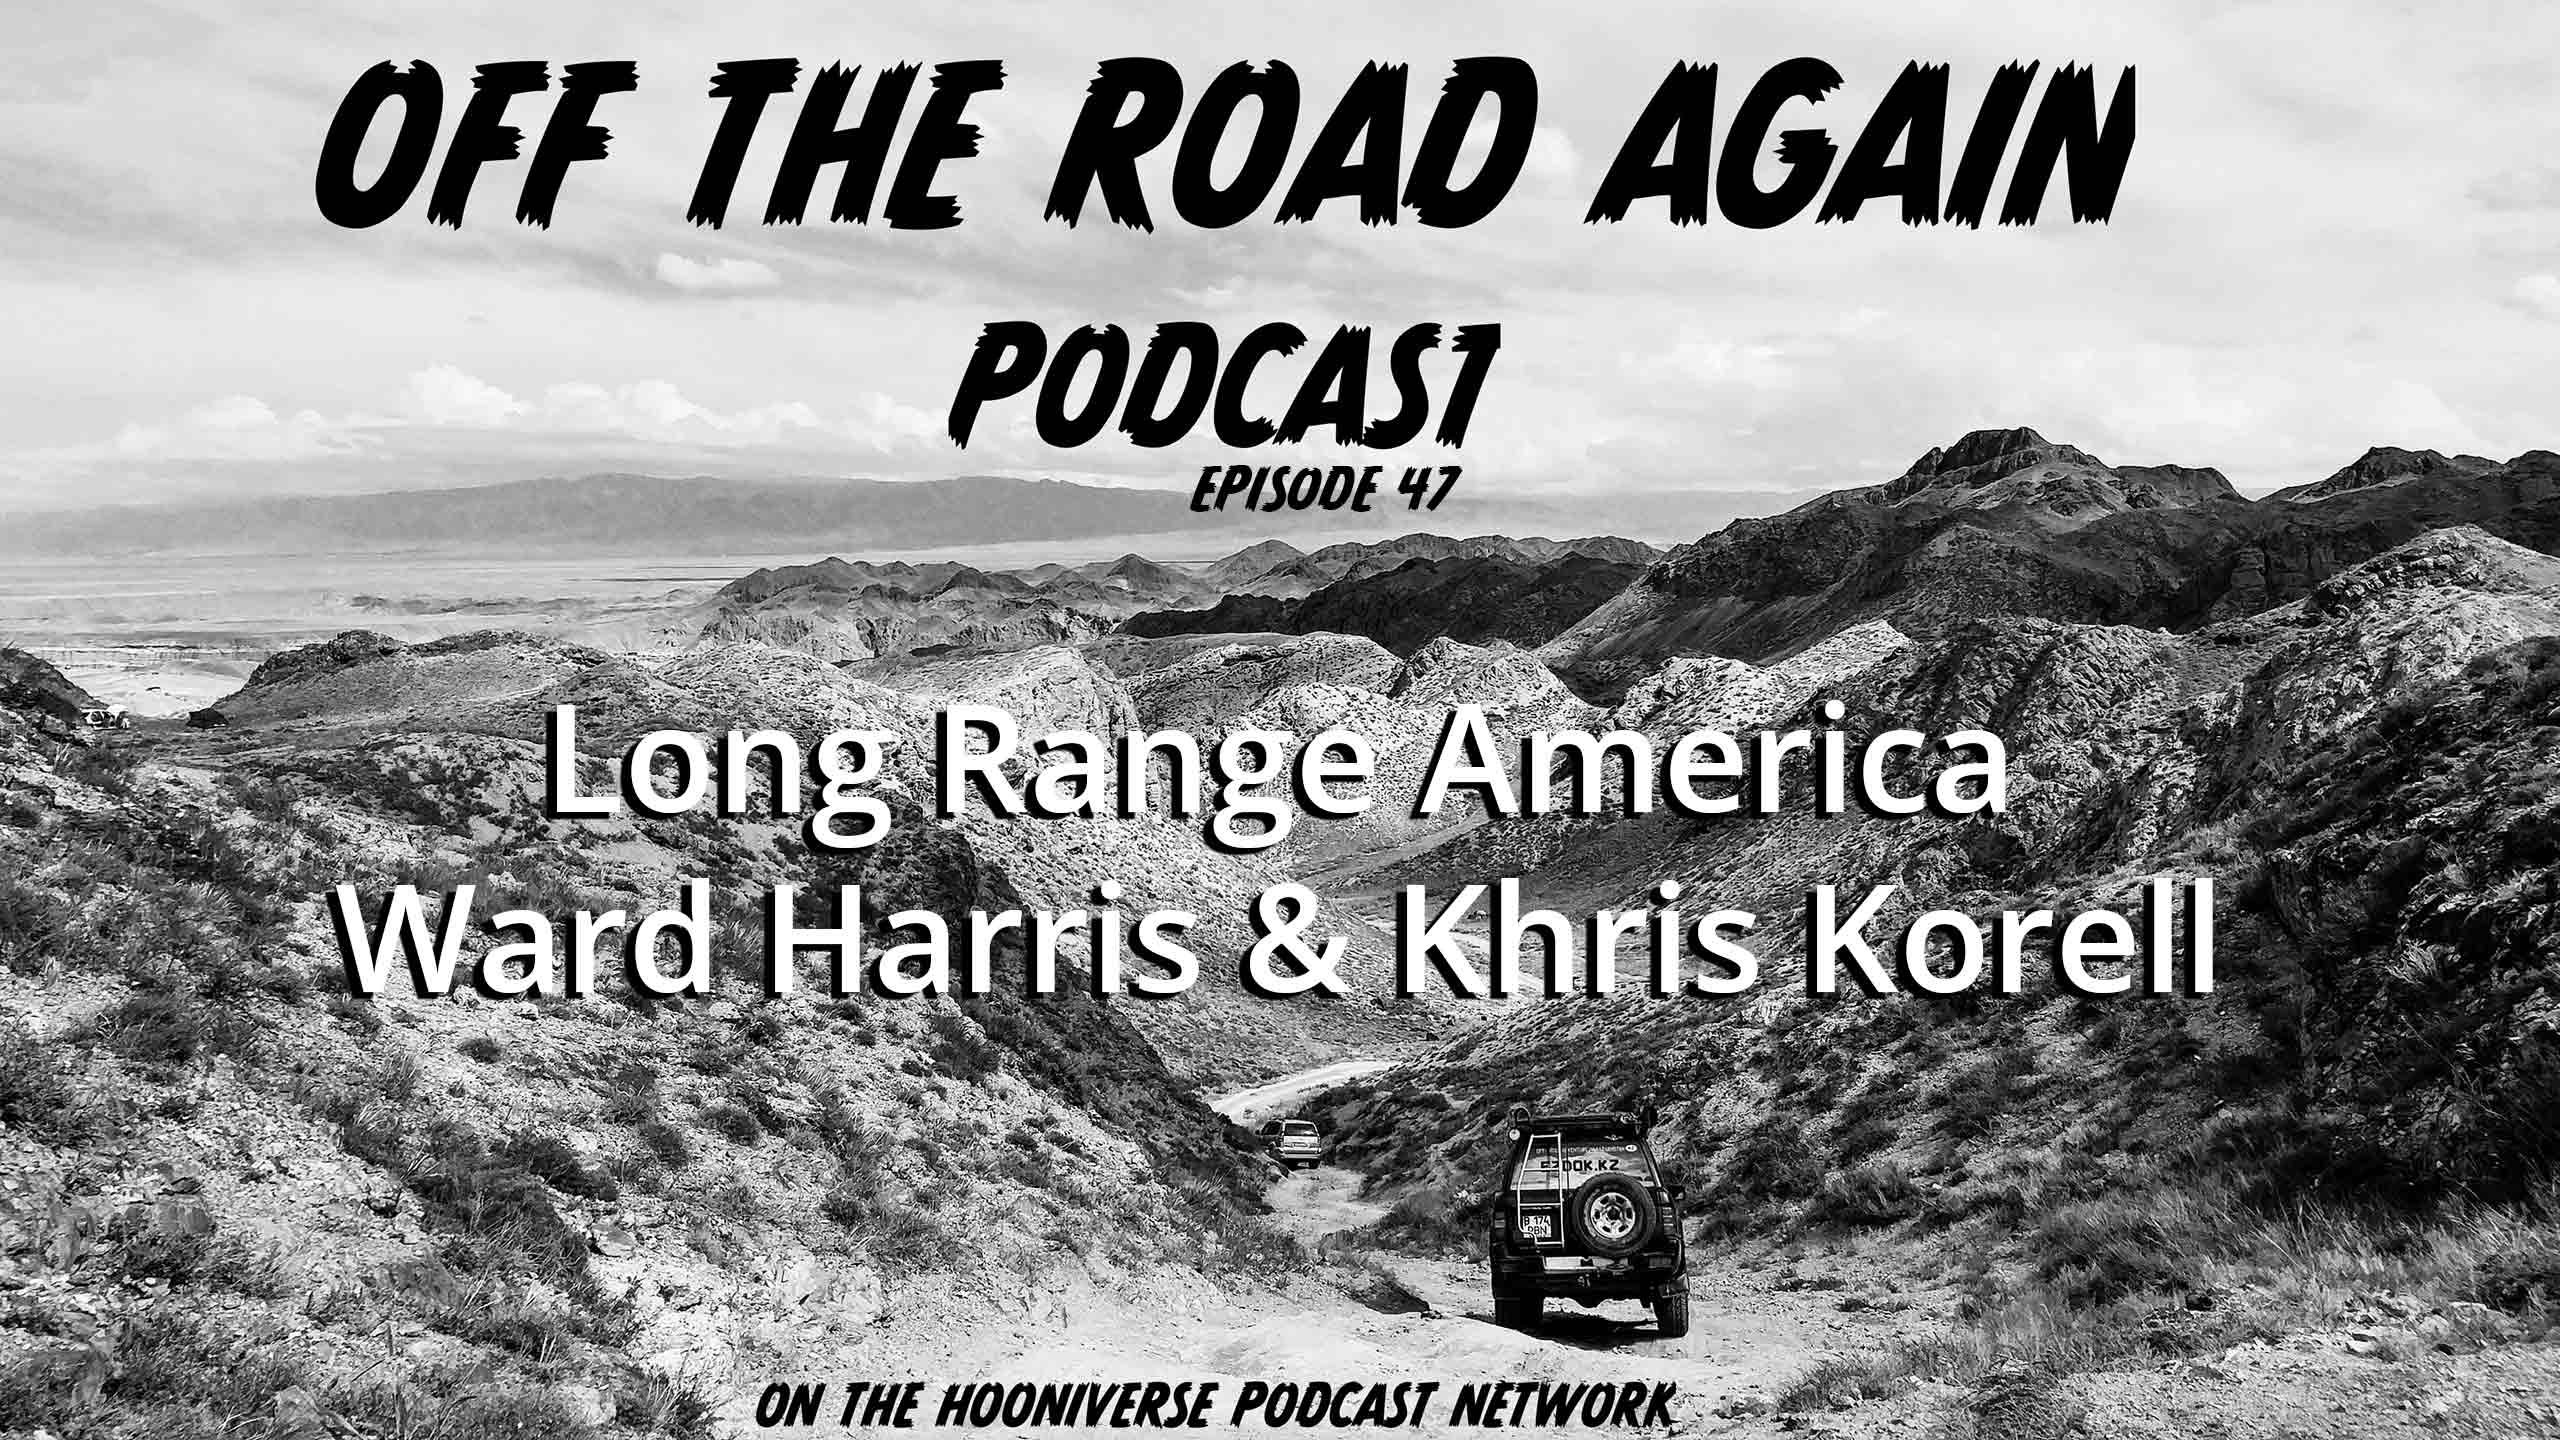 Long-Range-America-Off-The-Road-Again-Podcast-Episode-47